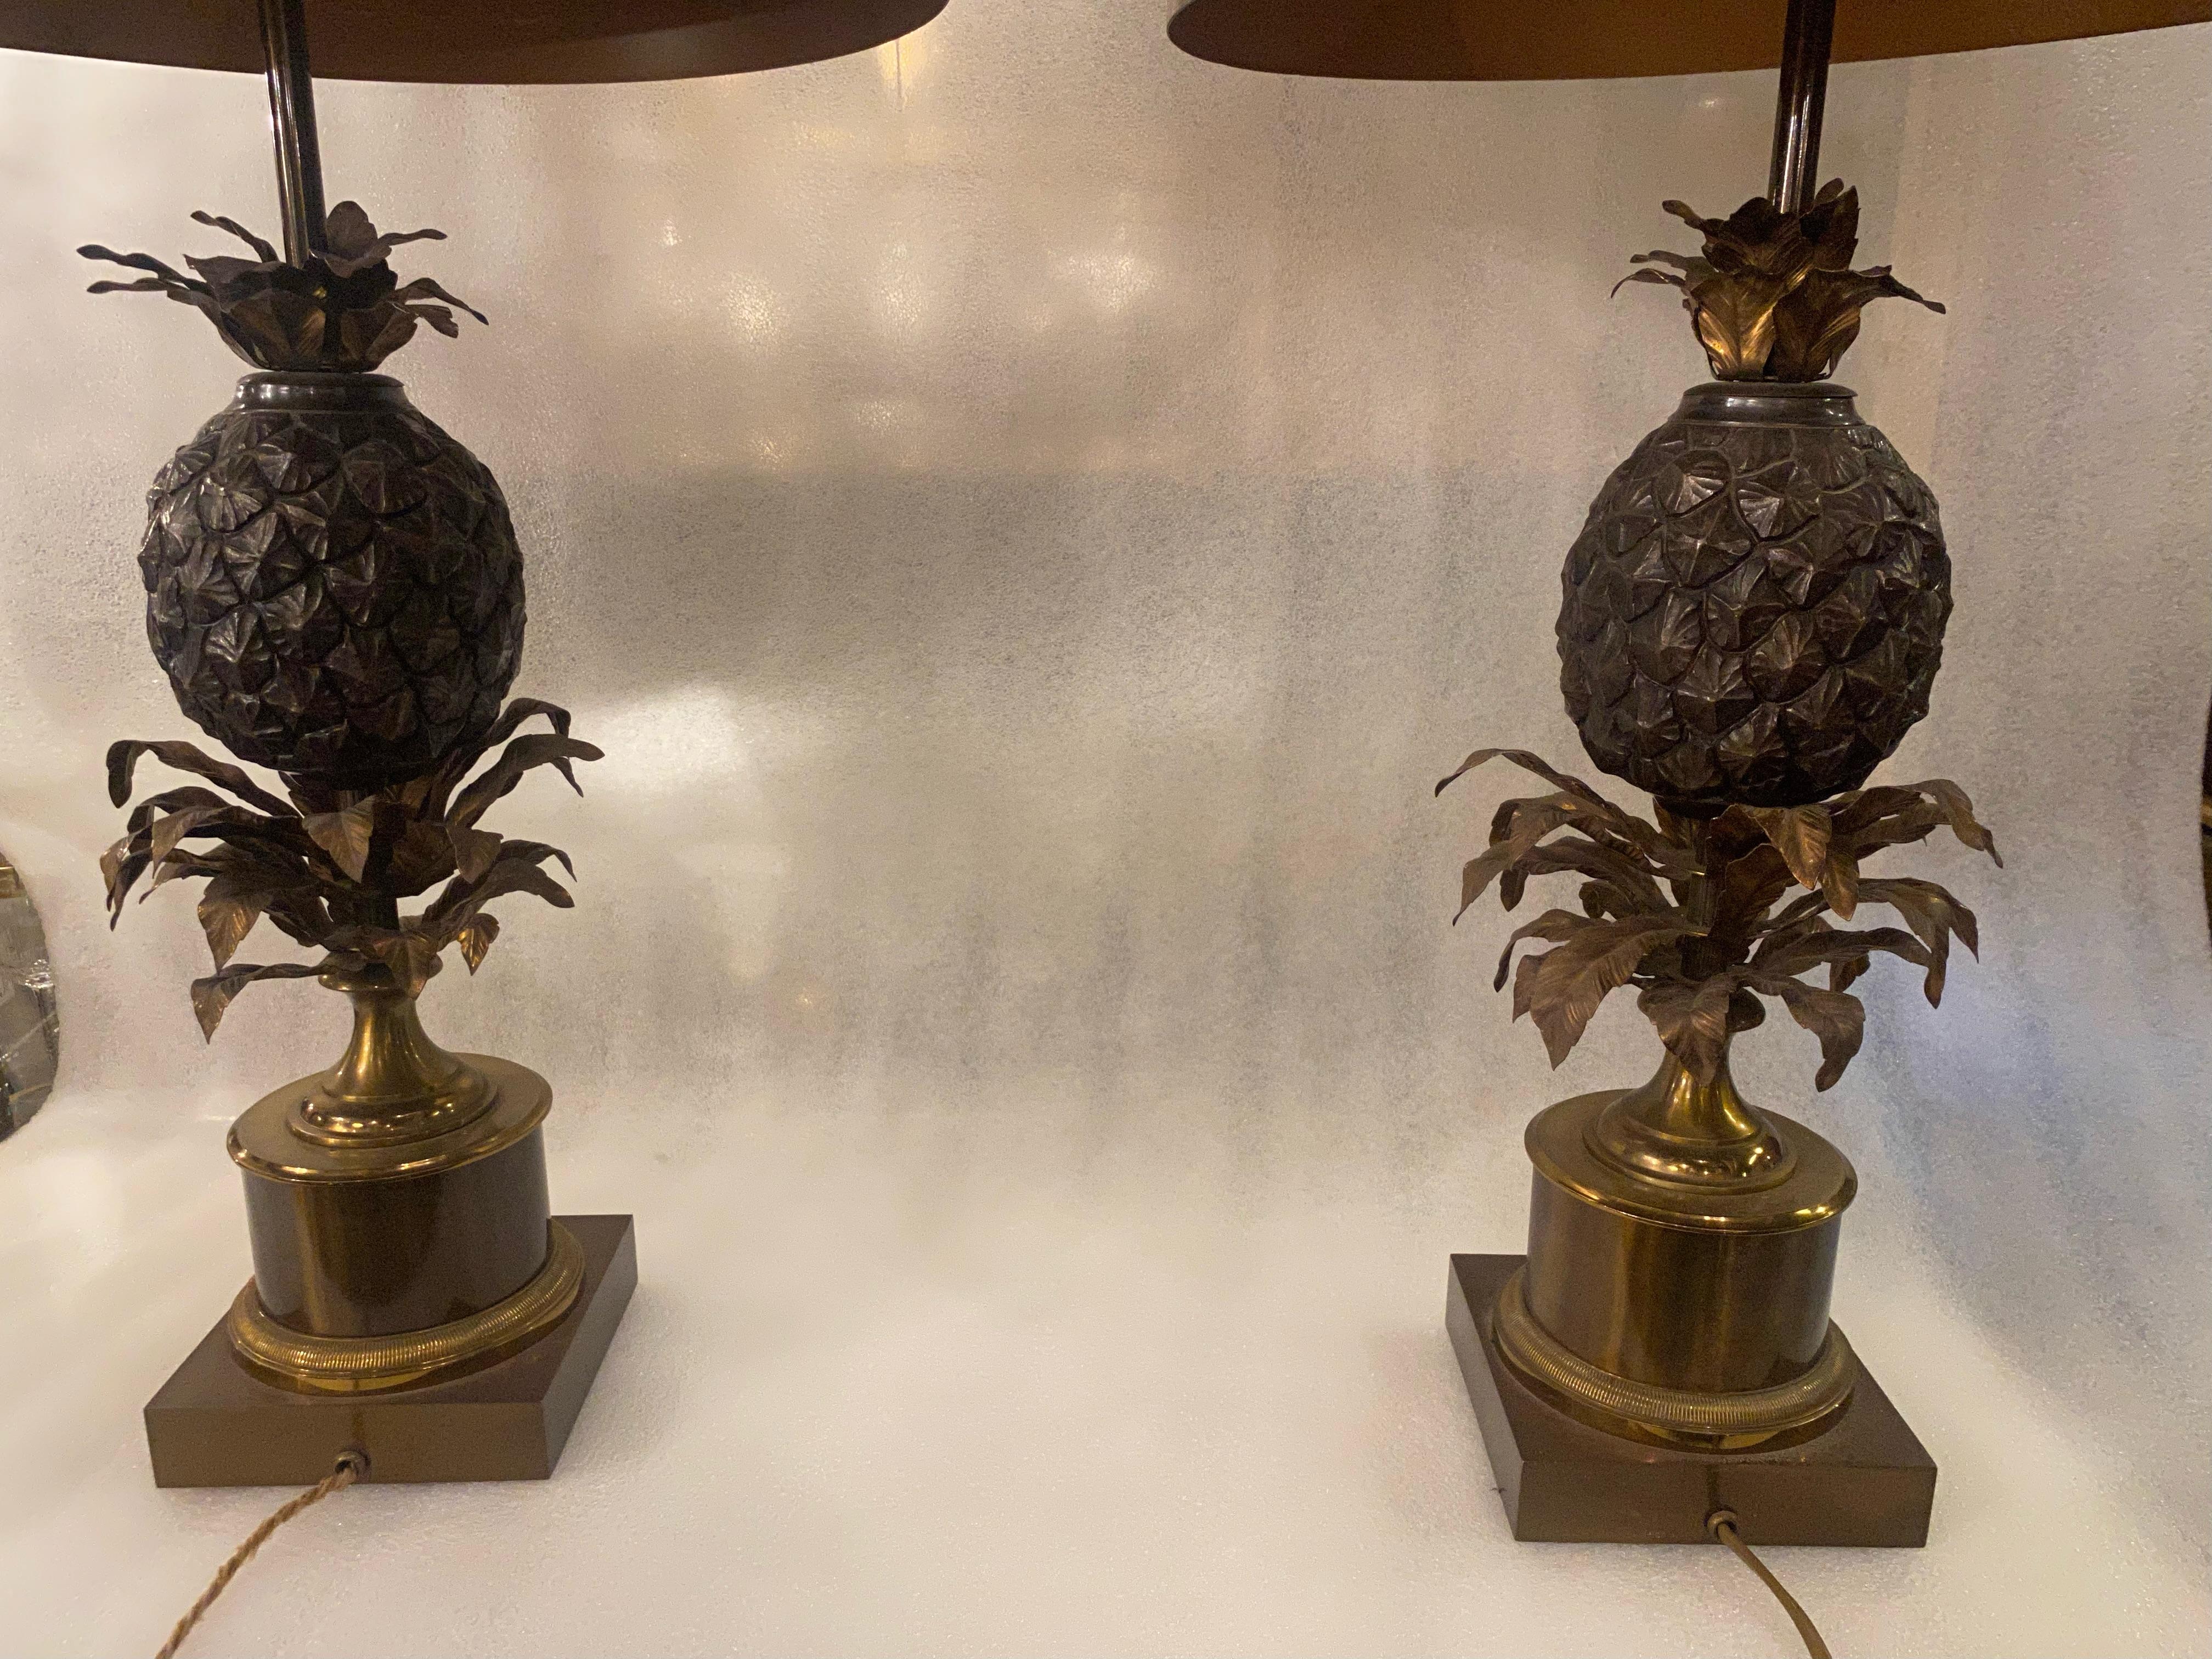 1950/70 Pair of Bronze Pineapple Lamps or Similar, Brass Shade, Signed Charles For Sale 11